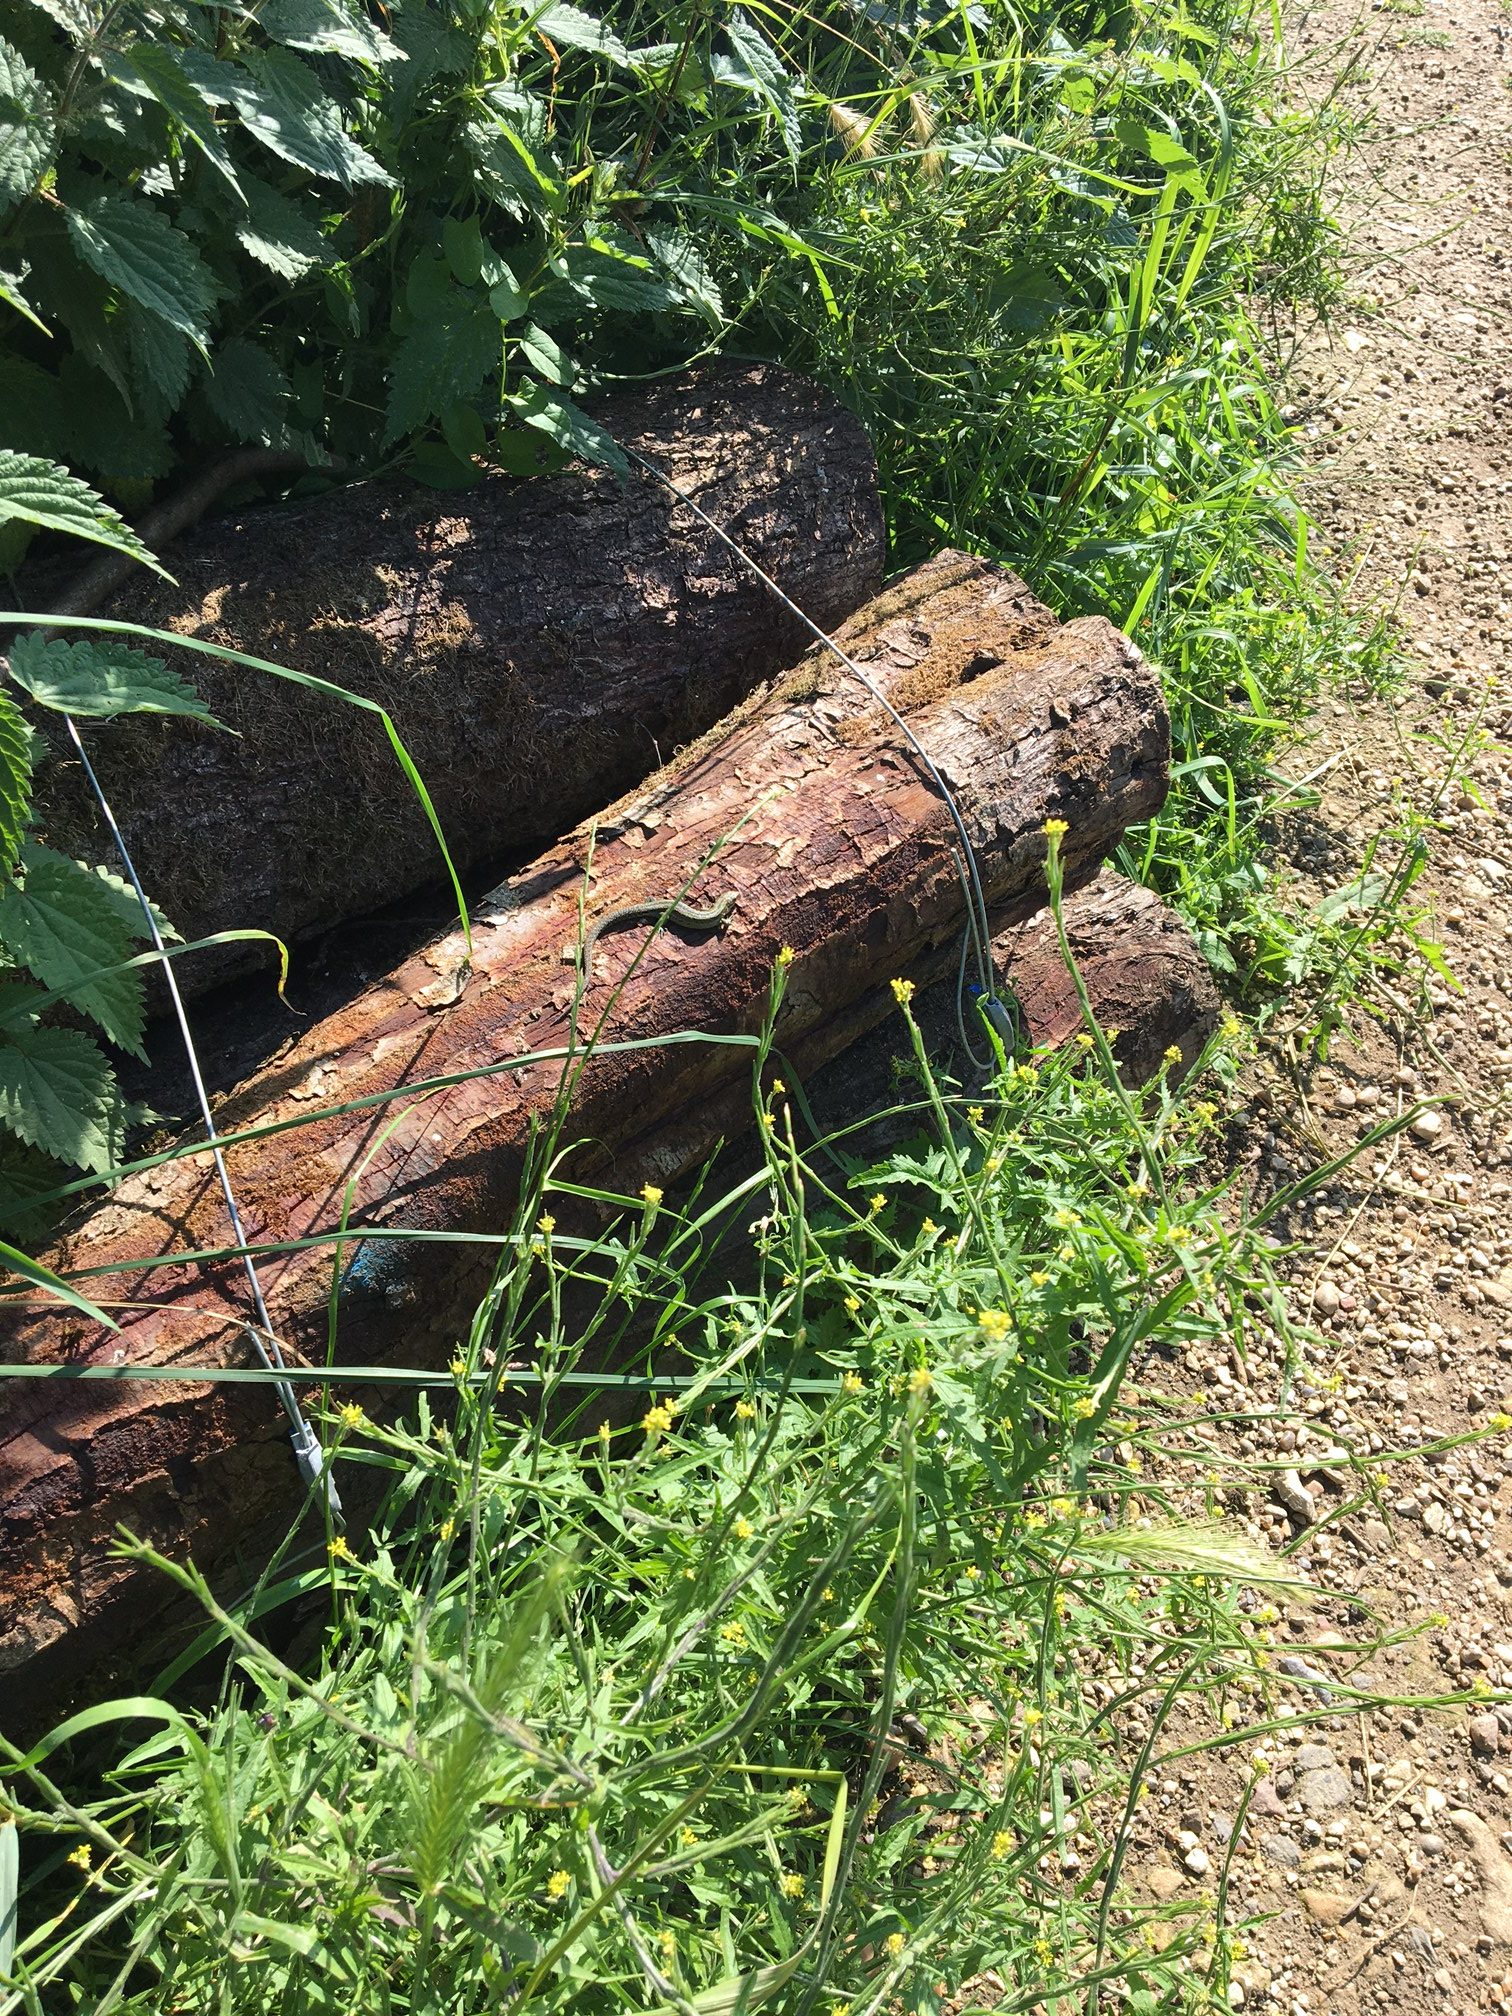 Lizards on logs at North Leigh Common